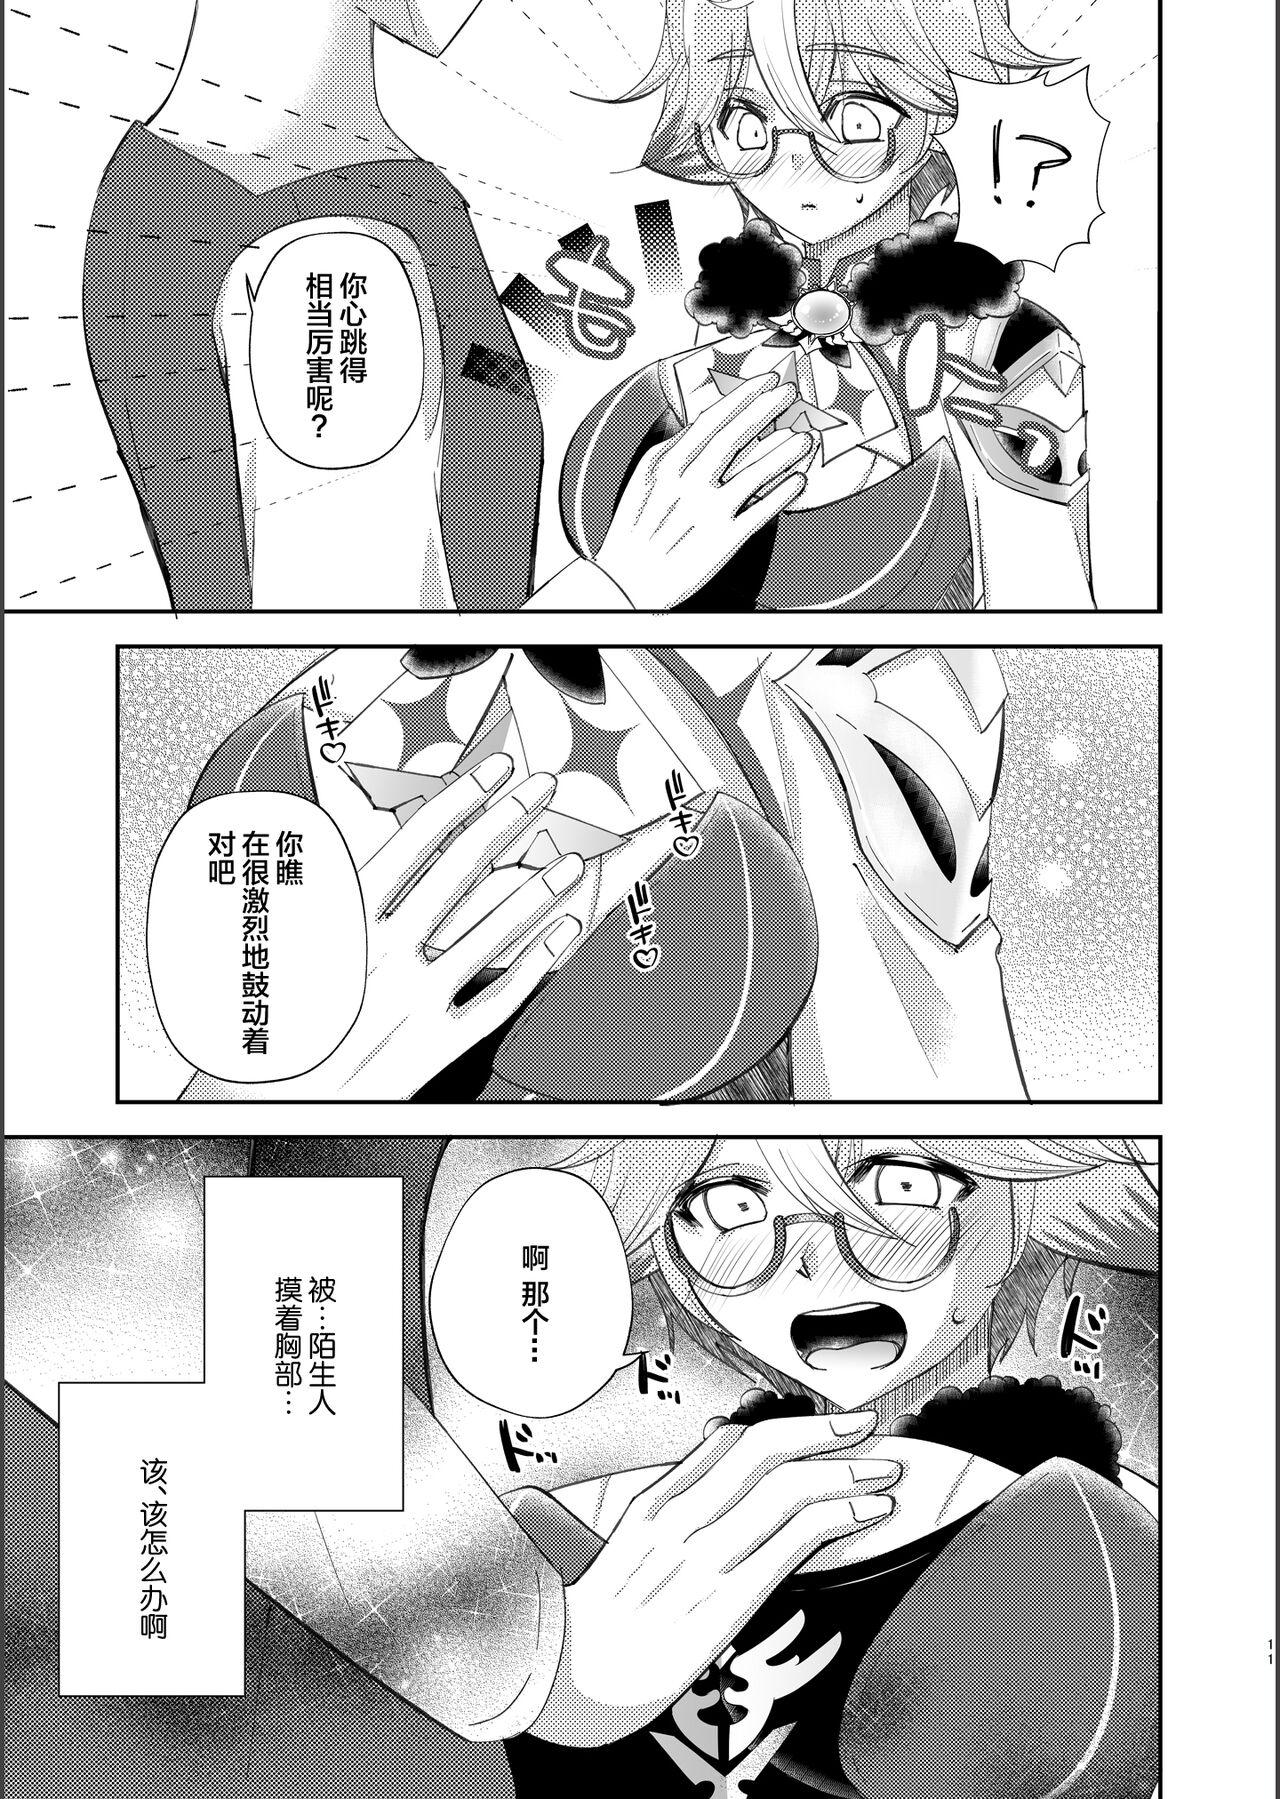 Uncensored repressed - Genshin impact Shecock - Page 10